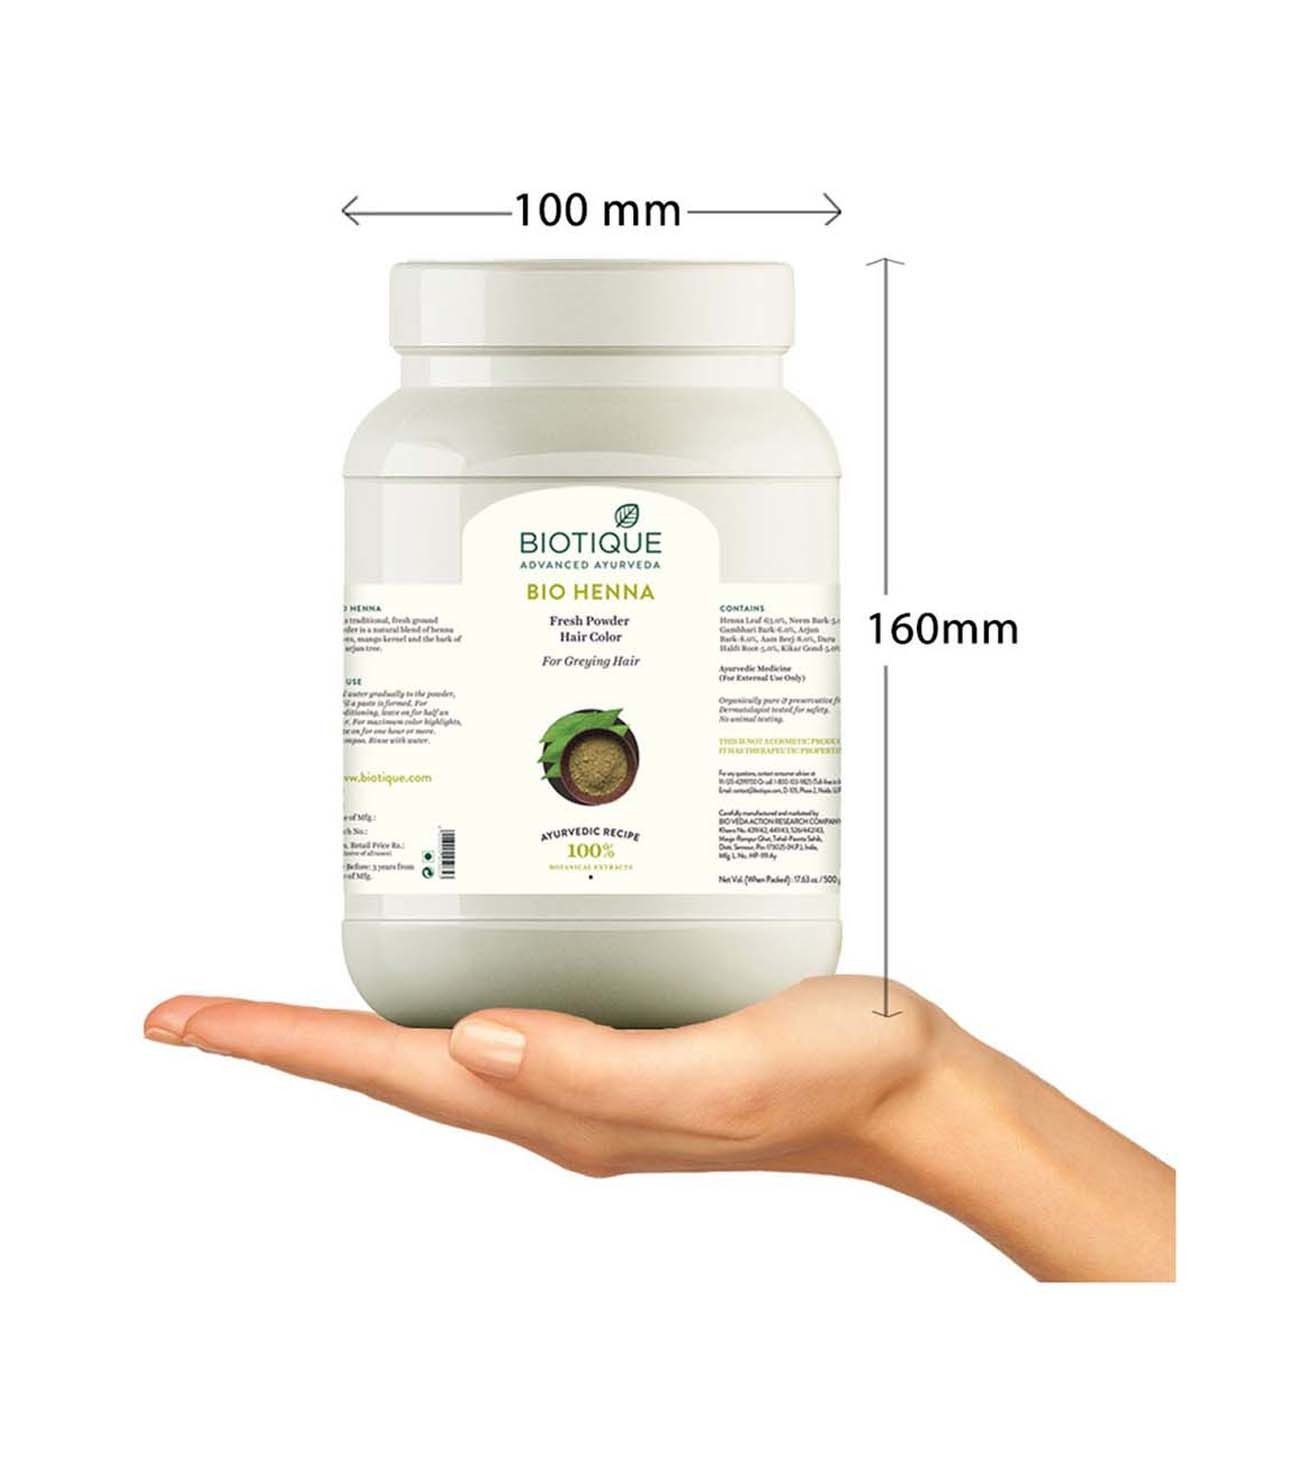 Biotique Bio Henna Fresh Powder Hair Color - 500 gm from BIOTIQUE at best  prices on Tata Beauty